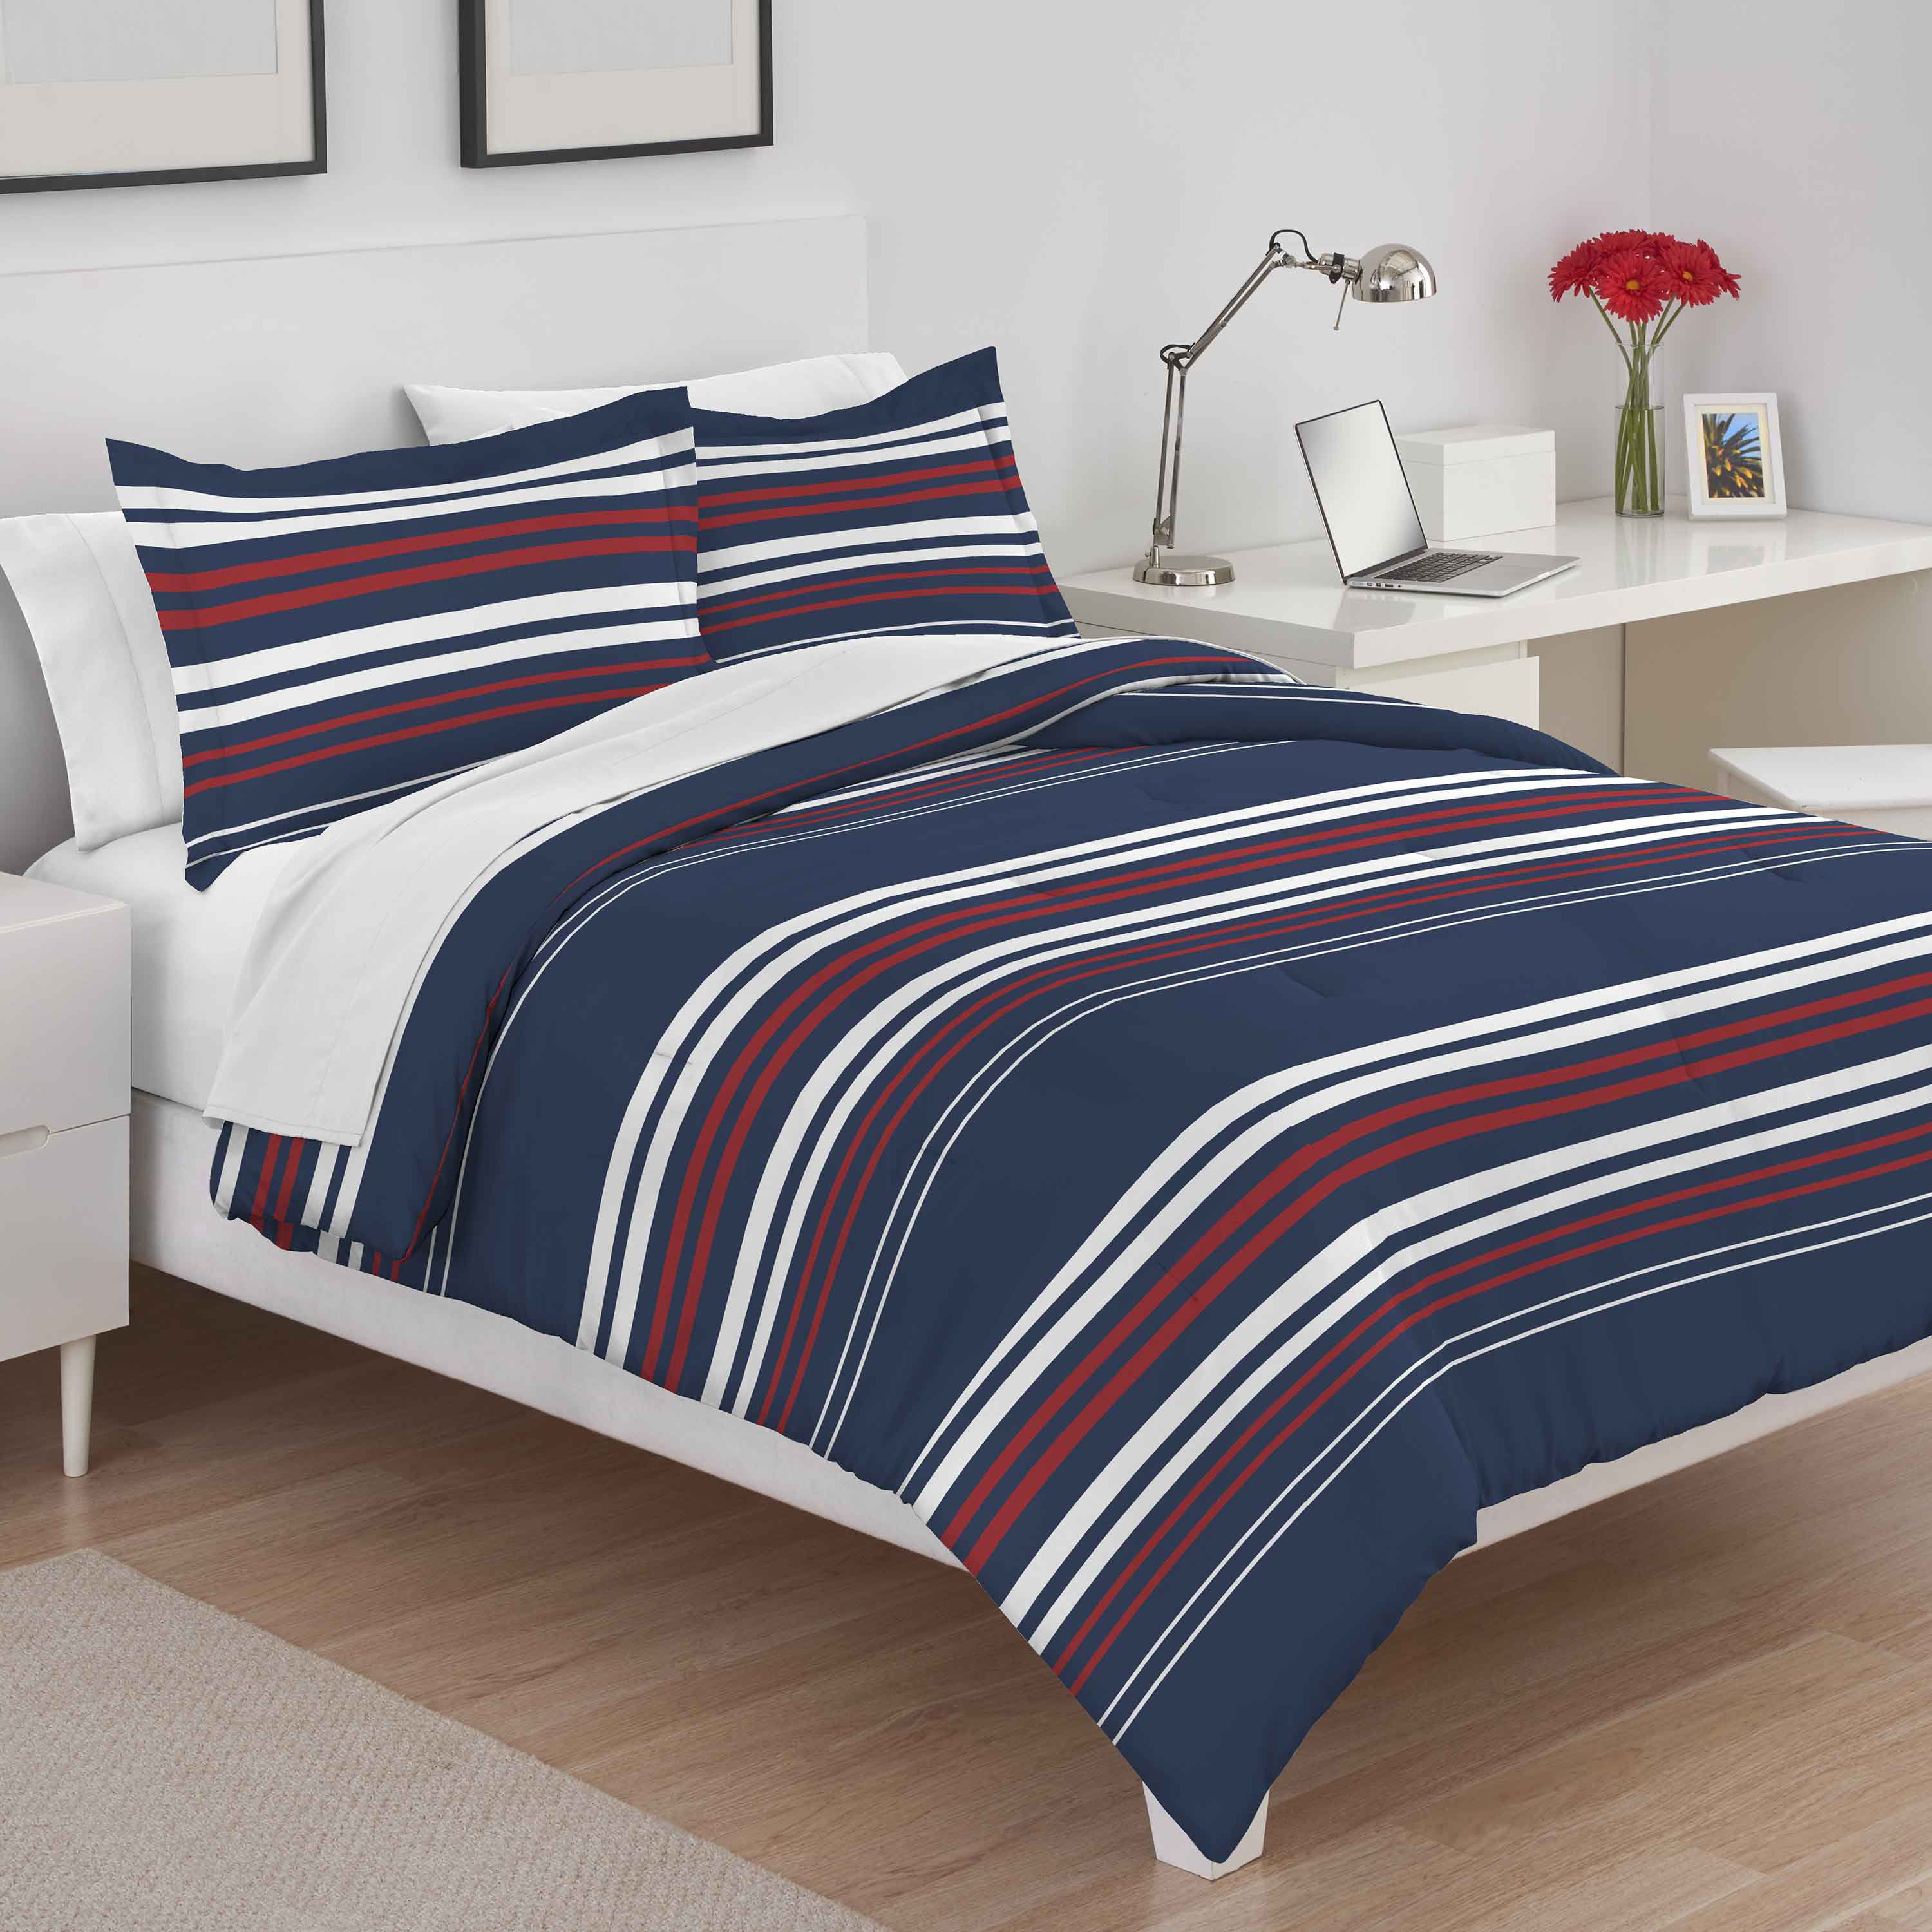 red and blue comforter set